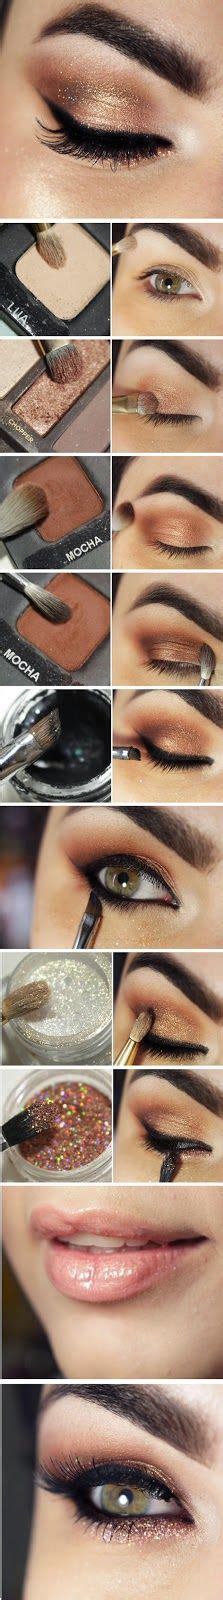 10 steps to do flawless makeup at home to rock at any party page 3 of 5 trend to wear